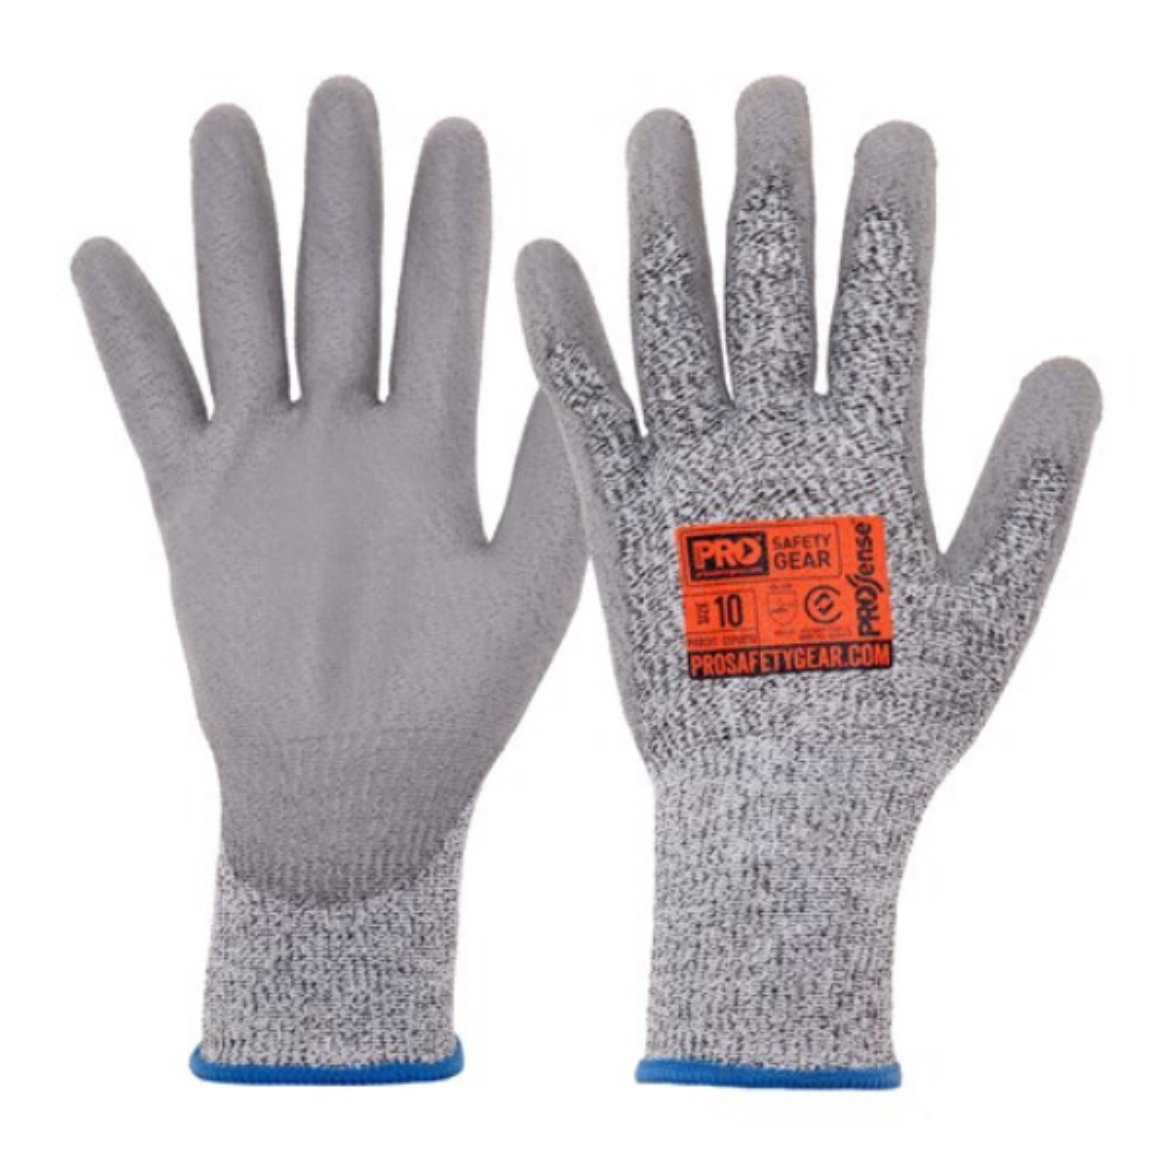 Picture of C5PUD - C5 CUT RESISTANT PU DIPPED GLOVE. PACK OF 5. MULTIPLE SIZES AVAILABLE